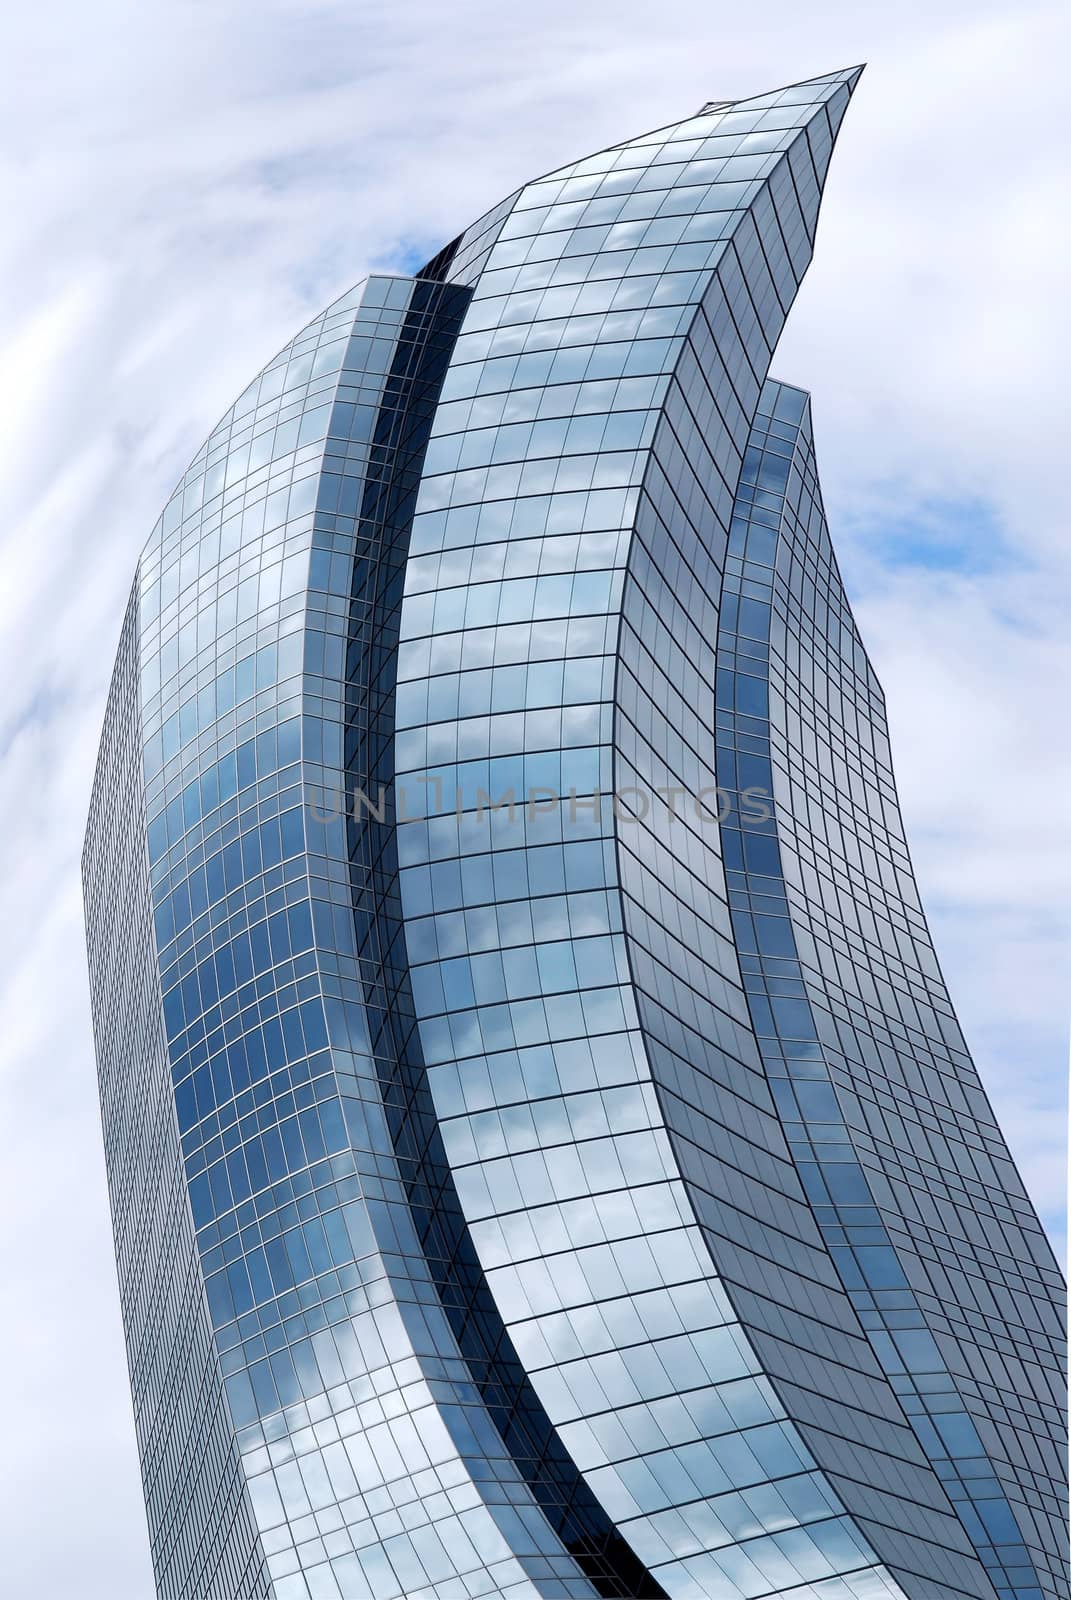 Distorted futuristic corporate building with glass walls reflecting clouds